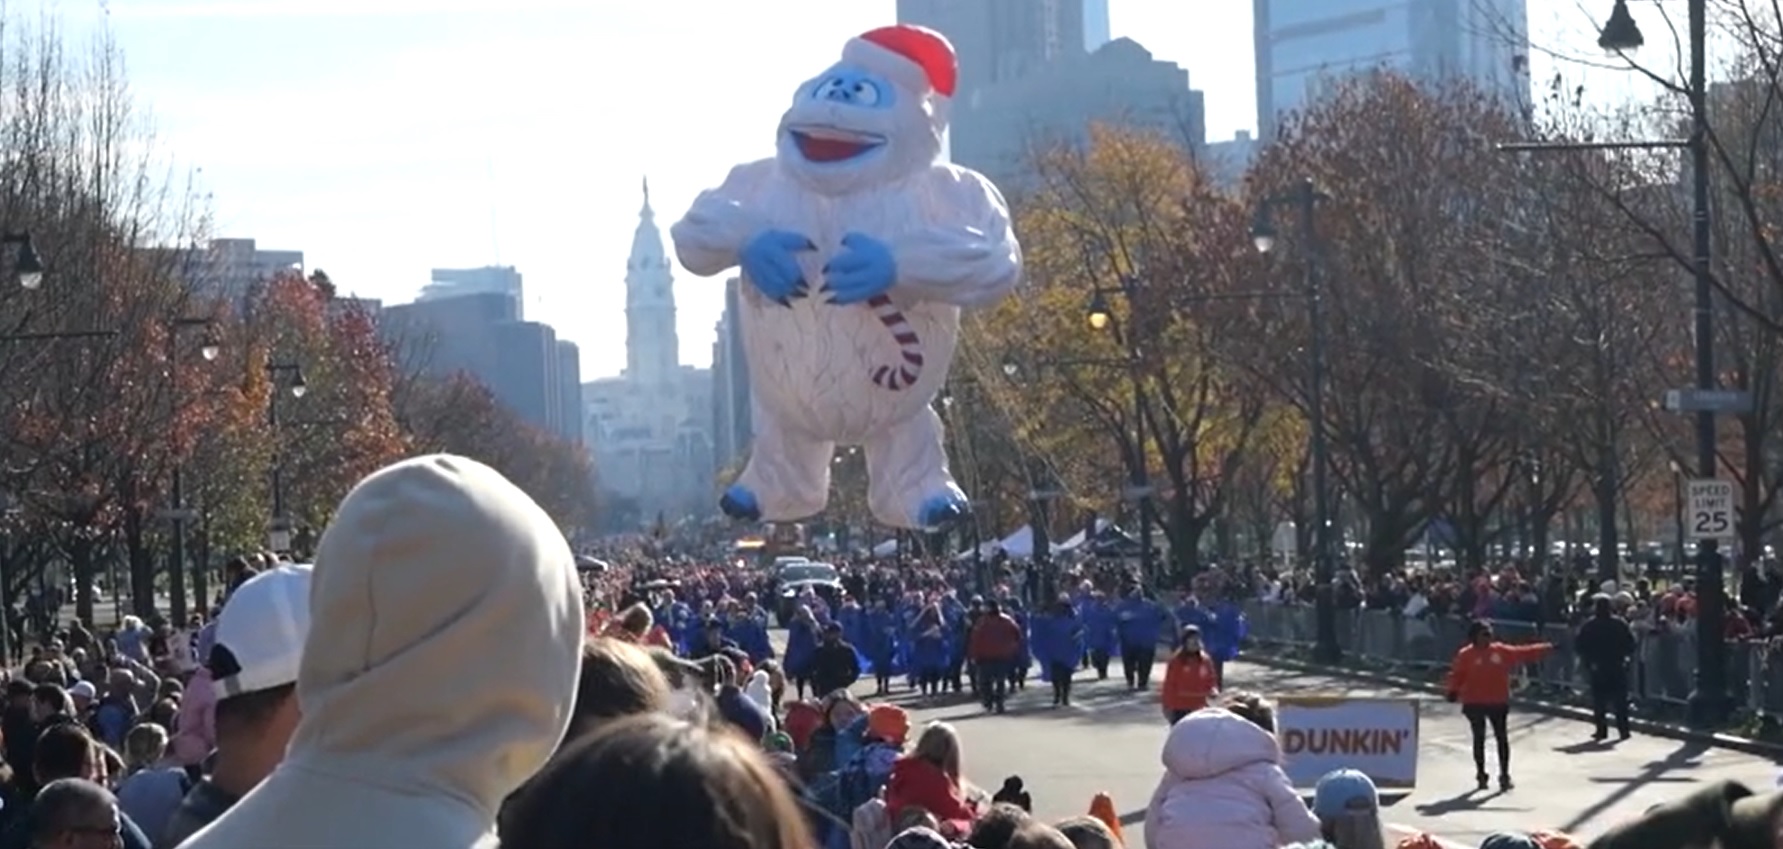 In Philadelphia, US Oldest Thanksgiving Parade Marks Its 103rd Year